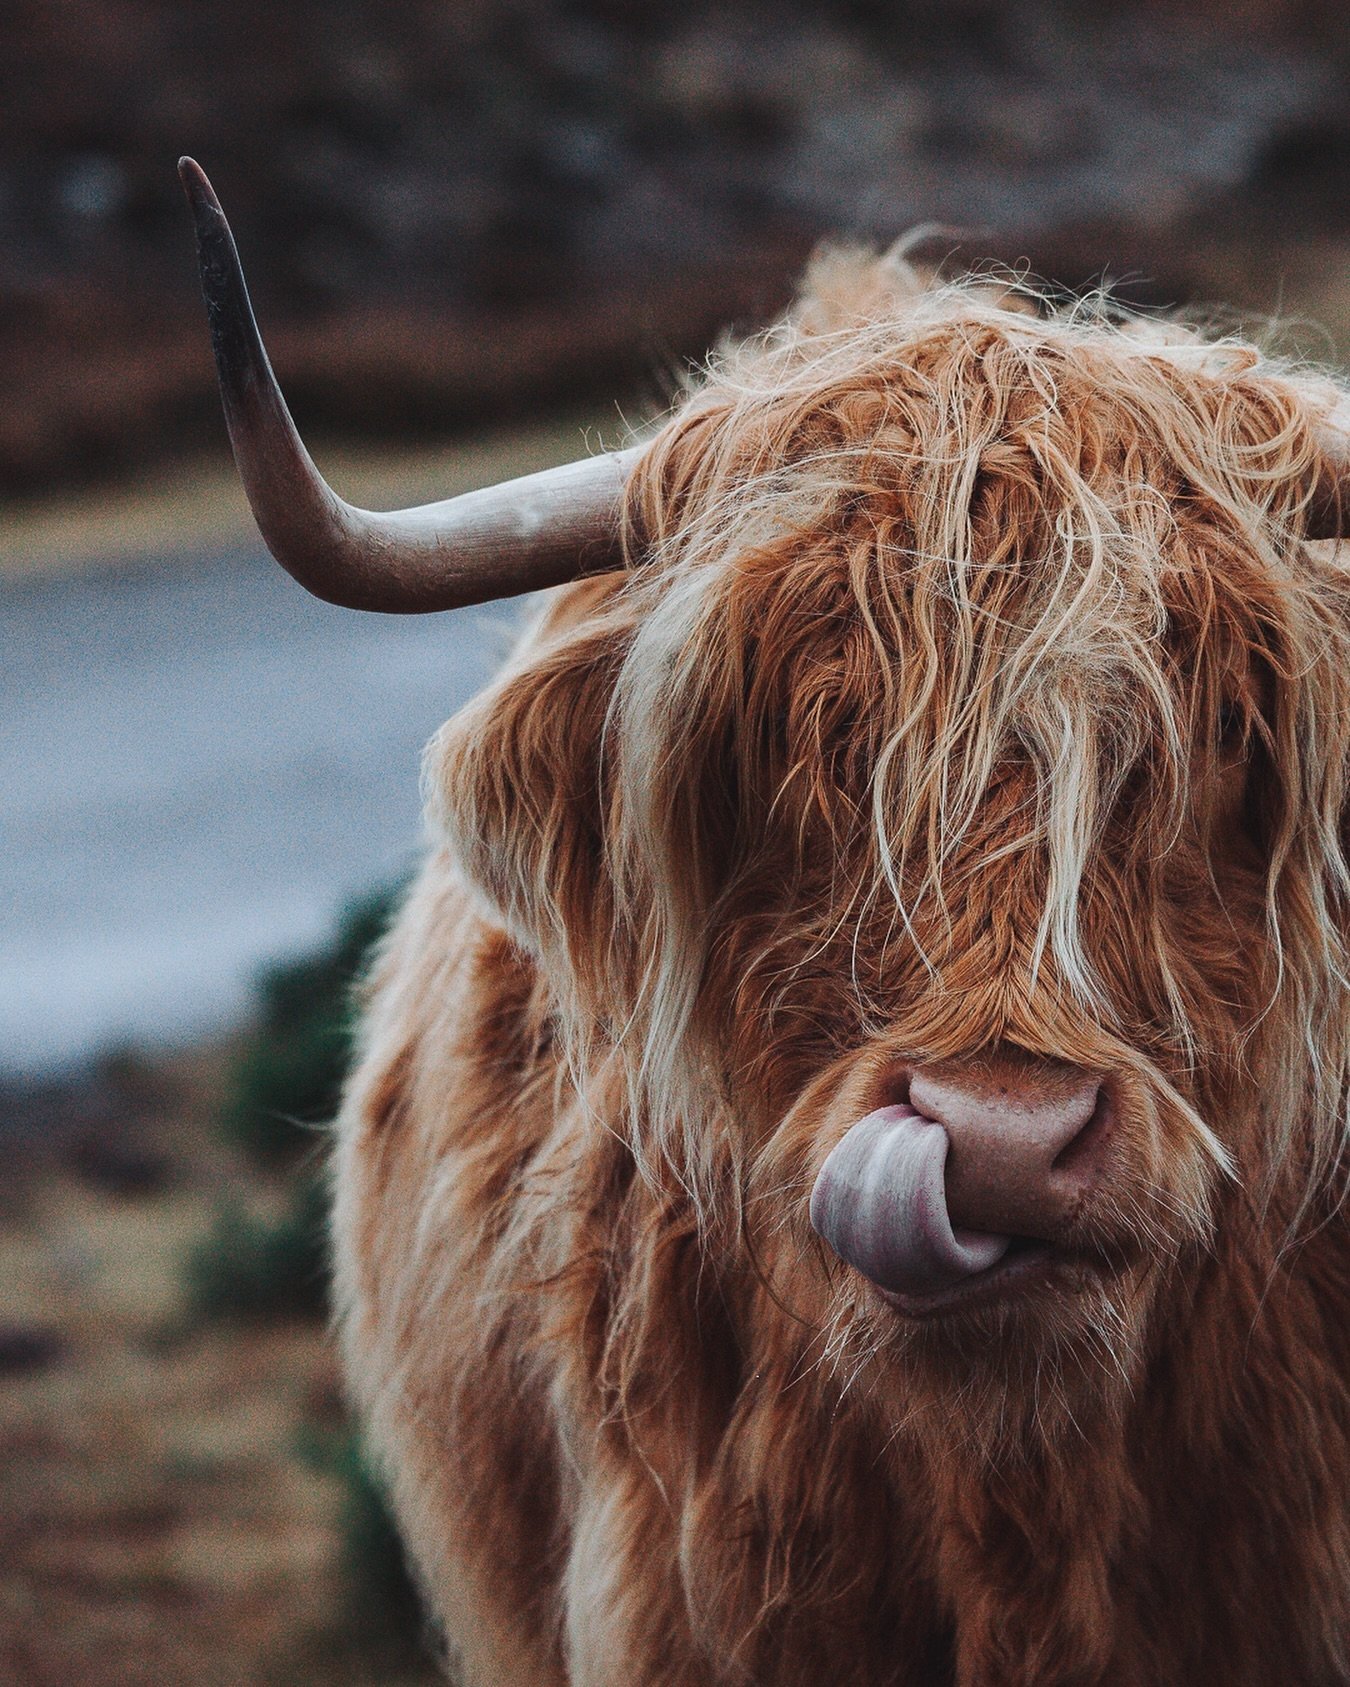 Sending love to these adorable fluffy pals! Did you know that Highland cows were once predominantly black? Thanks to the Victorians and their preference for ginger cows, selective breeding led to these majestic creatures donning their iconic light-co